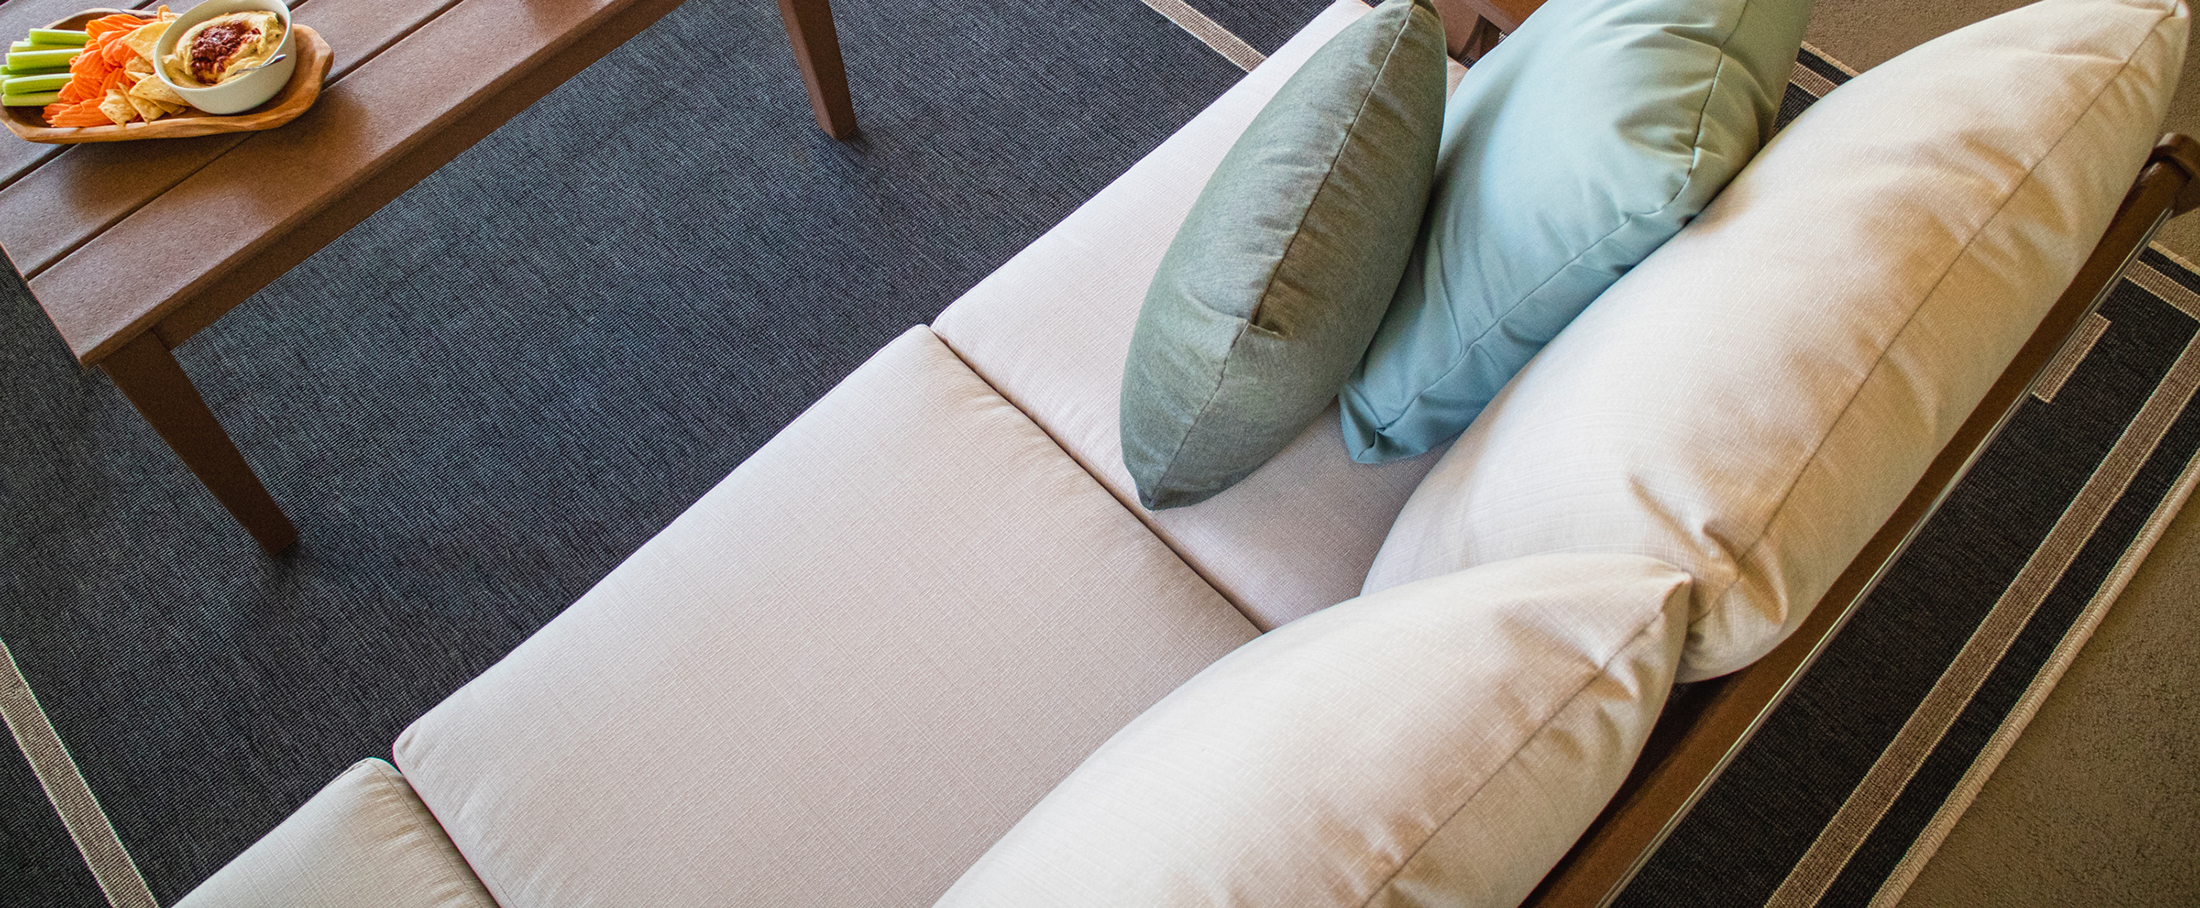 Tips on choosing the best fabric for your garden chair cushions